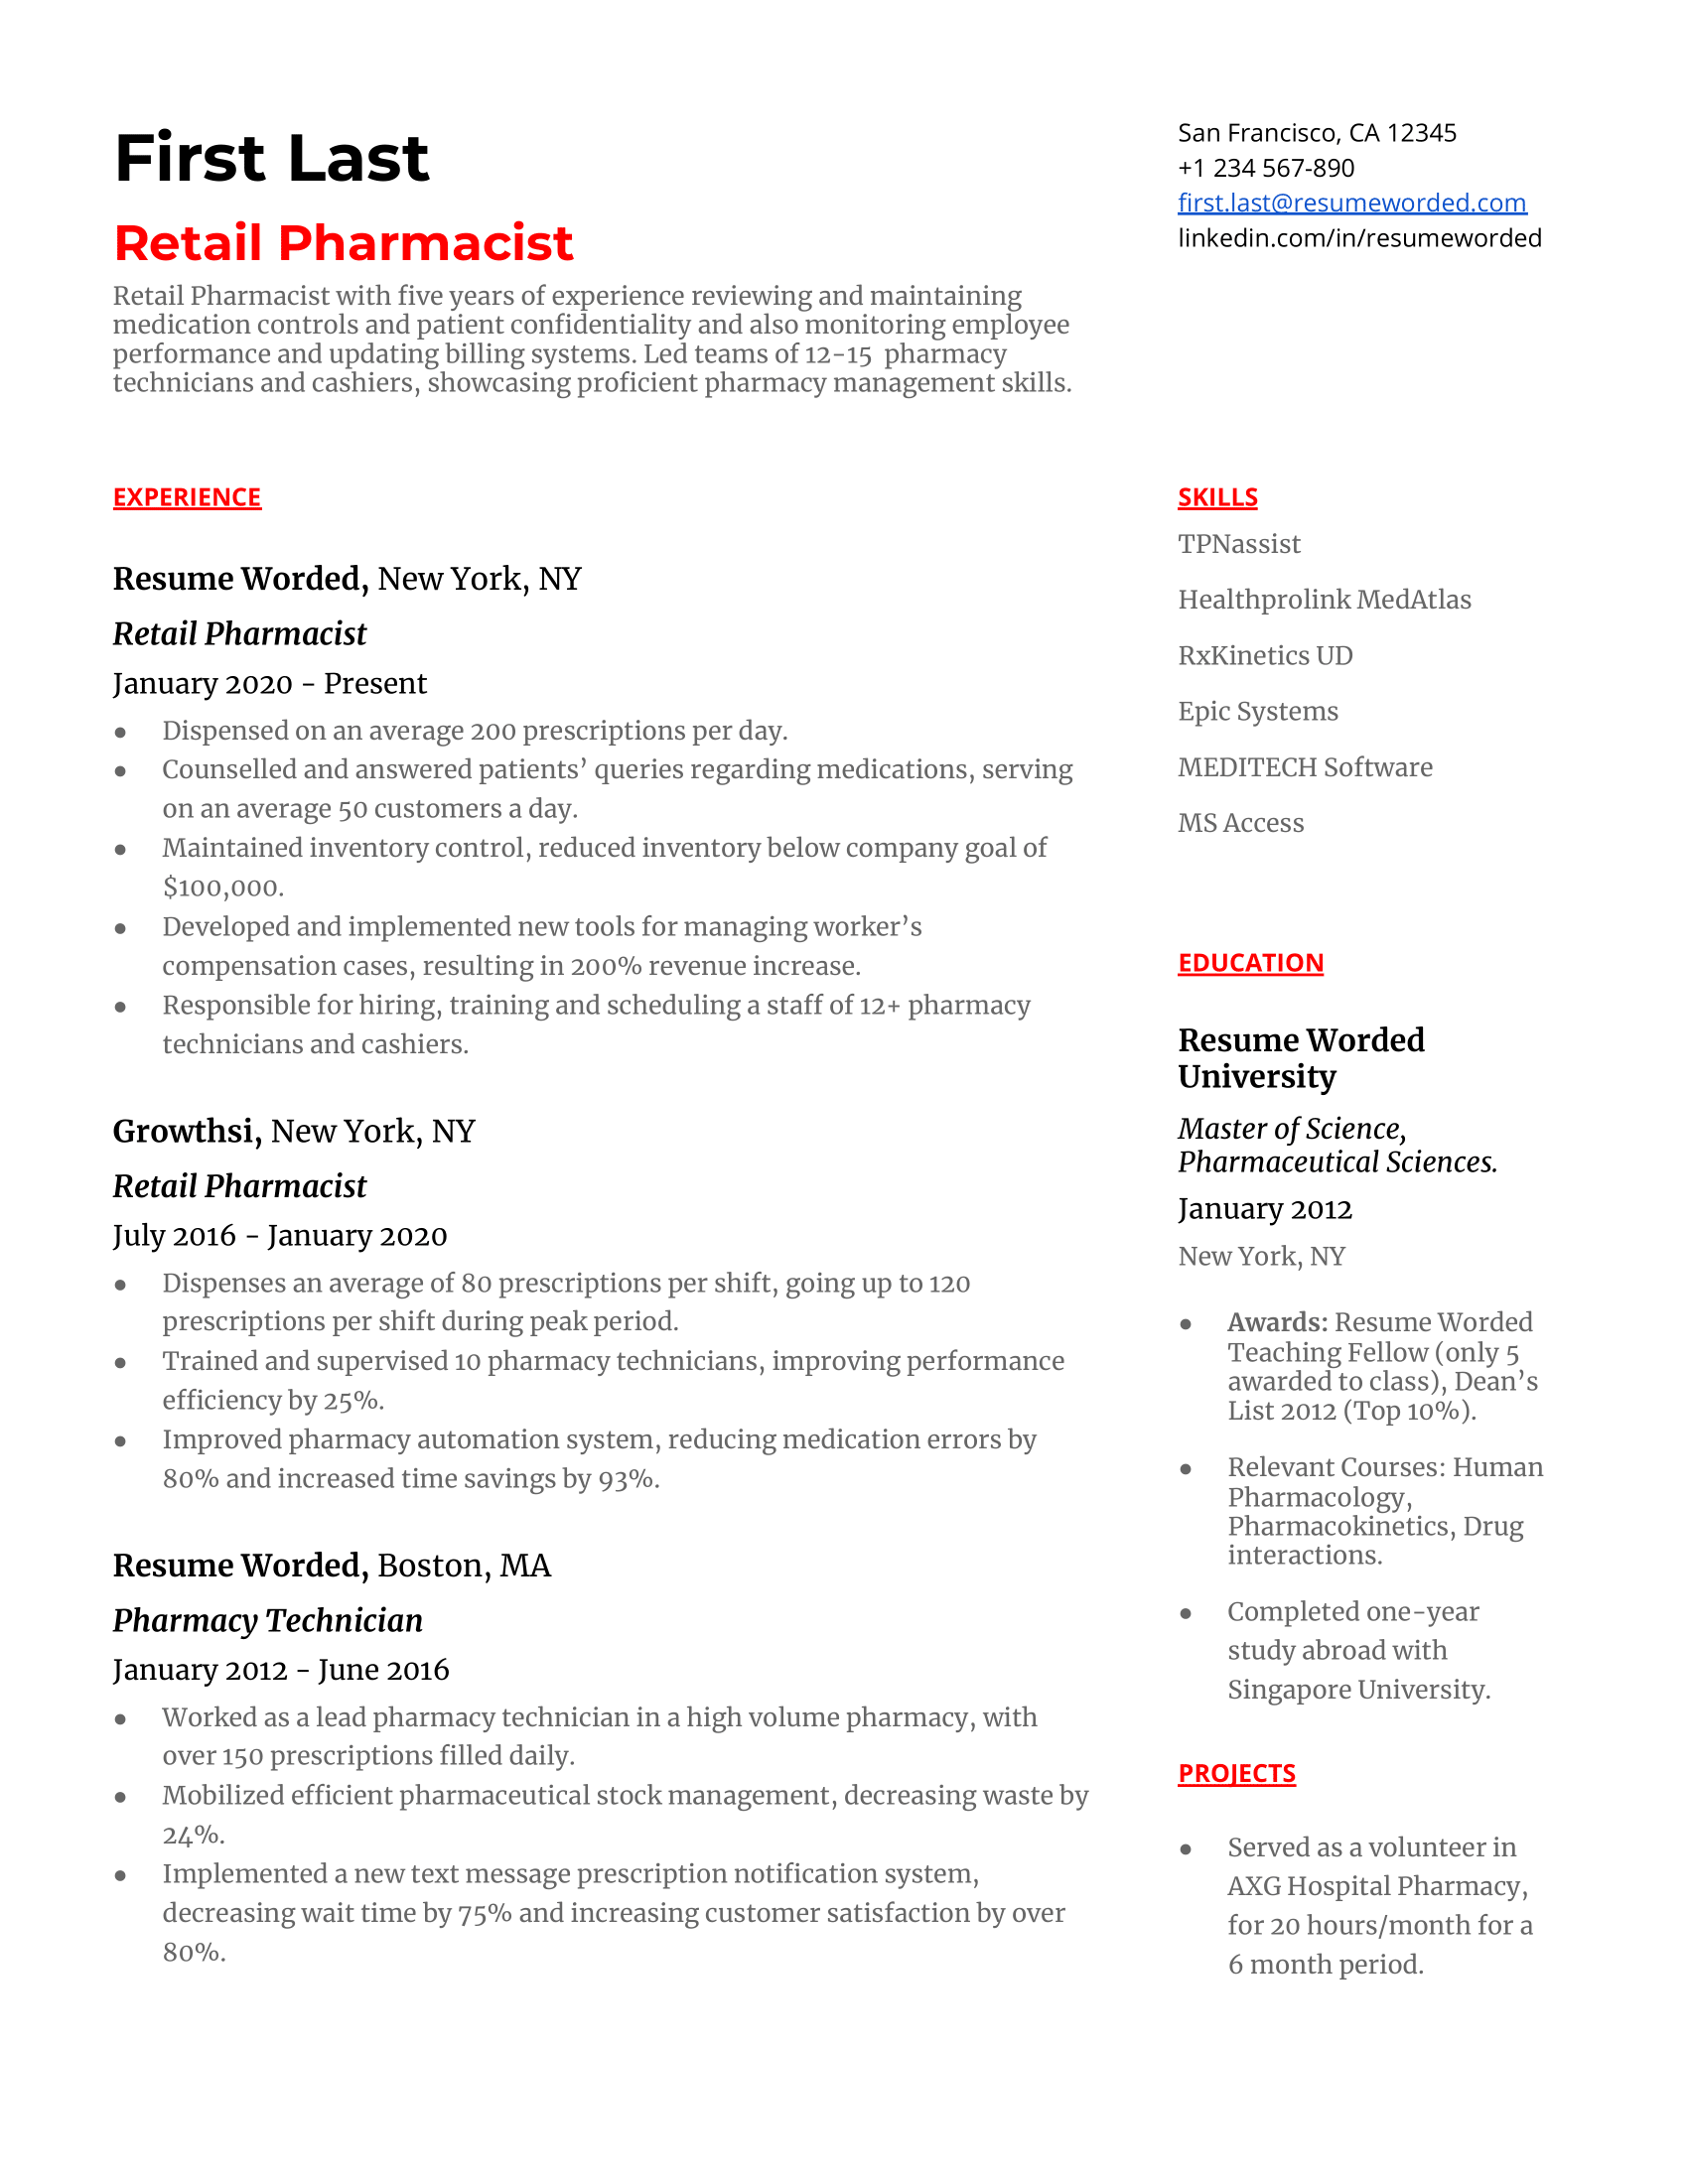 Retail pharmacist resume example template using a resume summary to highlight accomplishments